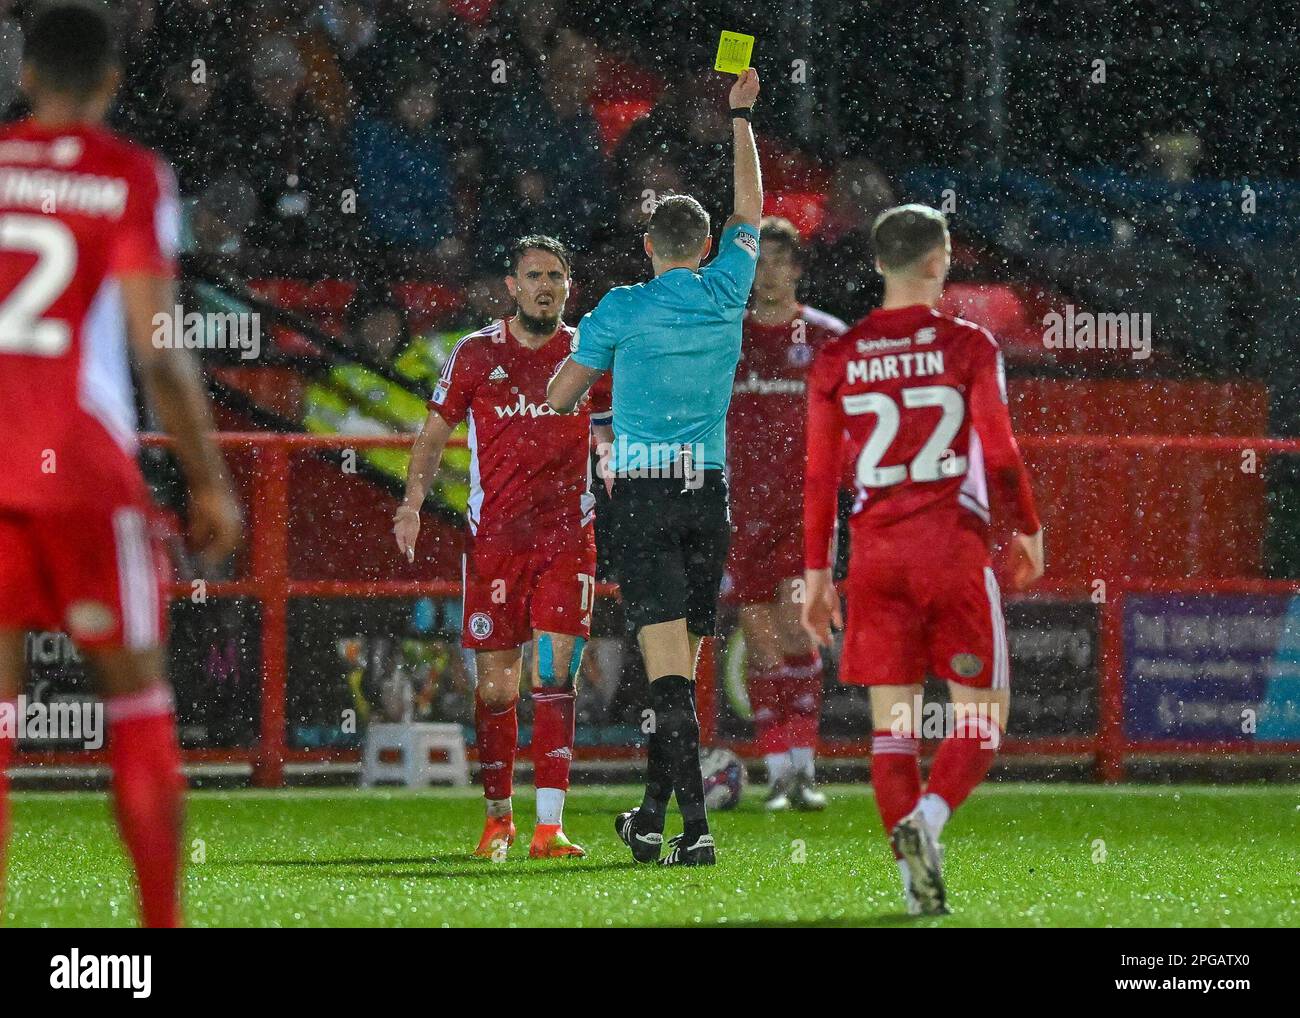 Sean McConville #11 of Accrington Stanley receives a yellow card during the Sky Bet League 1 match Accrington Stanley vs Plymouth Argyle at Wham Stadium, Accrington, United Kingdom, 21st March 2023  (Photo by Stan Kasala/News Images) Stock Photo